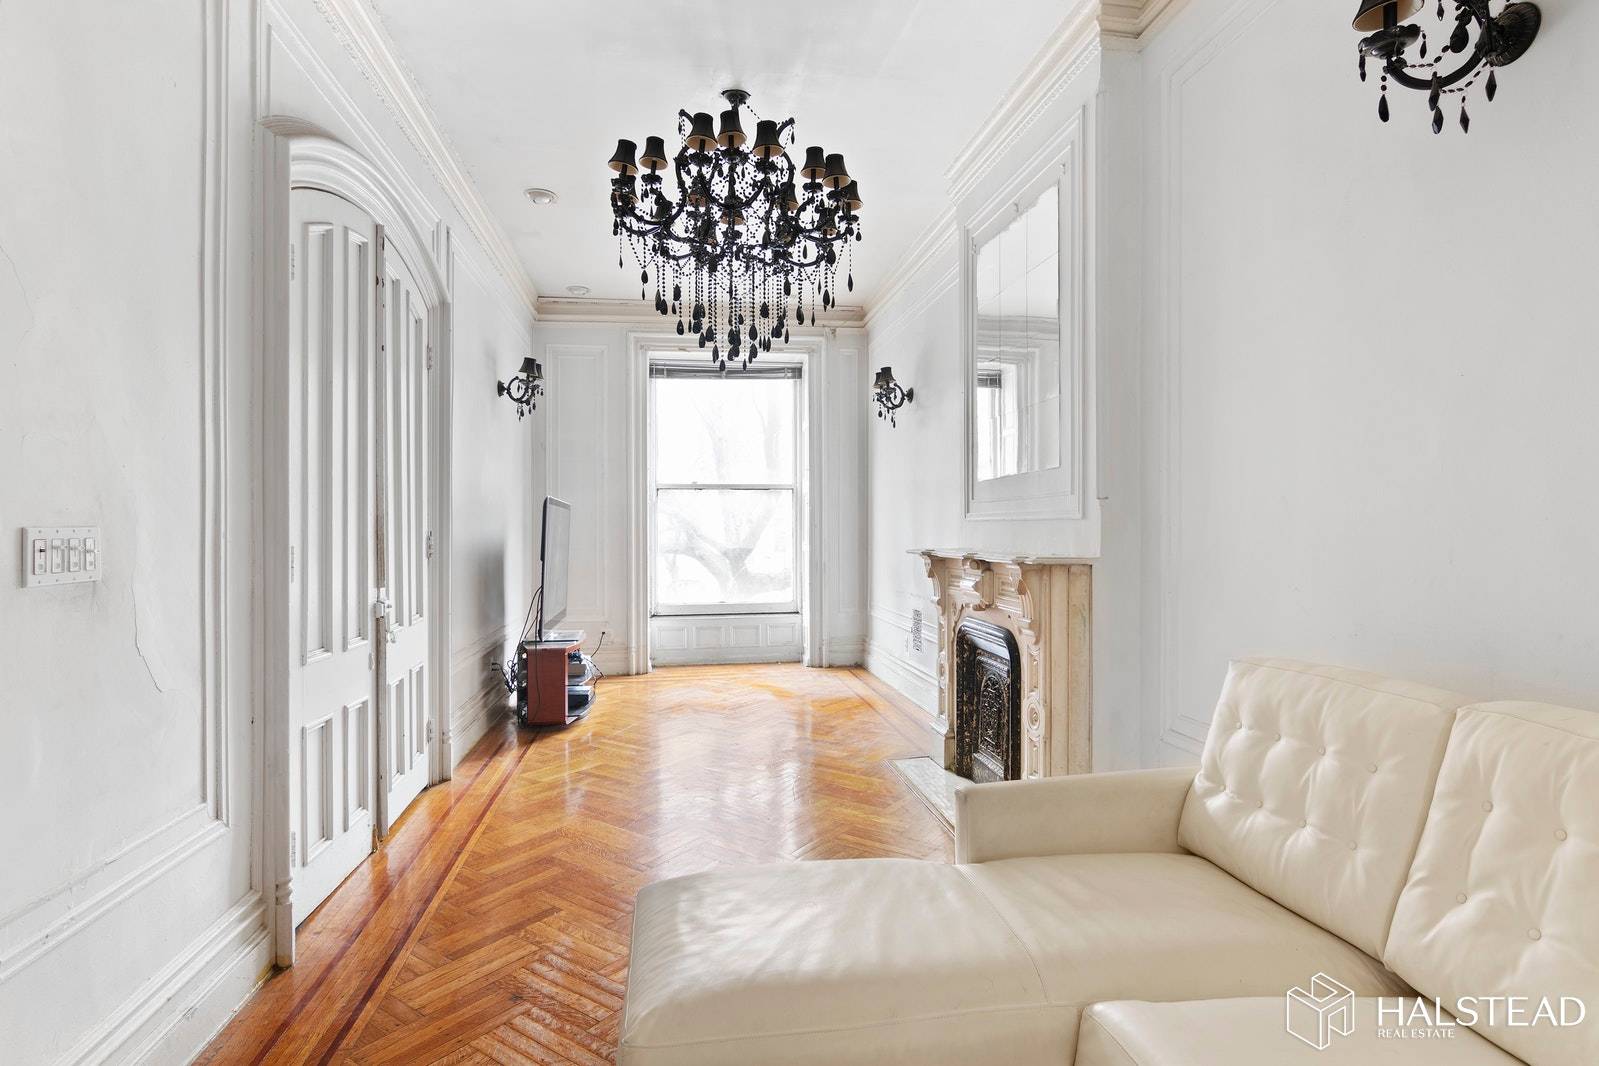 CLASSIC BROWNSTONE 1228 Dean Street is a Double Duplex 2 Family, 4 storied Brownstone Classic built in 1910 ; complete with original wrought iron gates, wide stoop and crowing cornices.